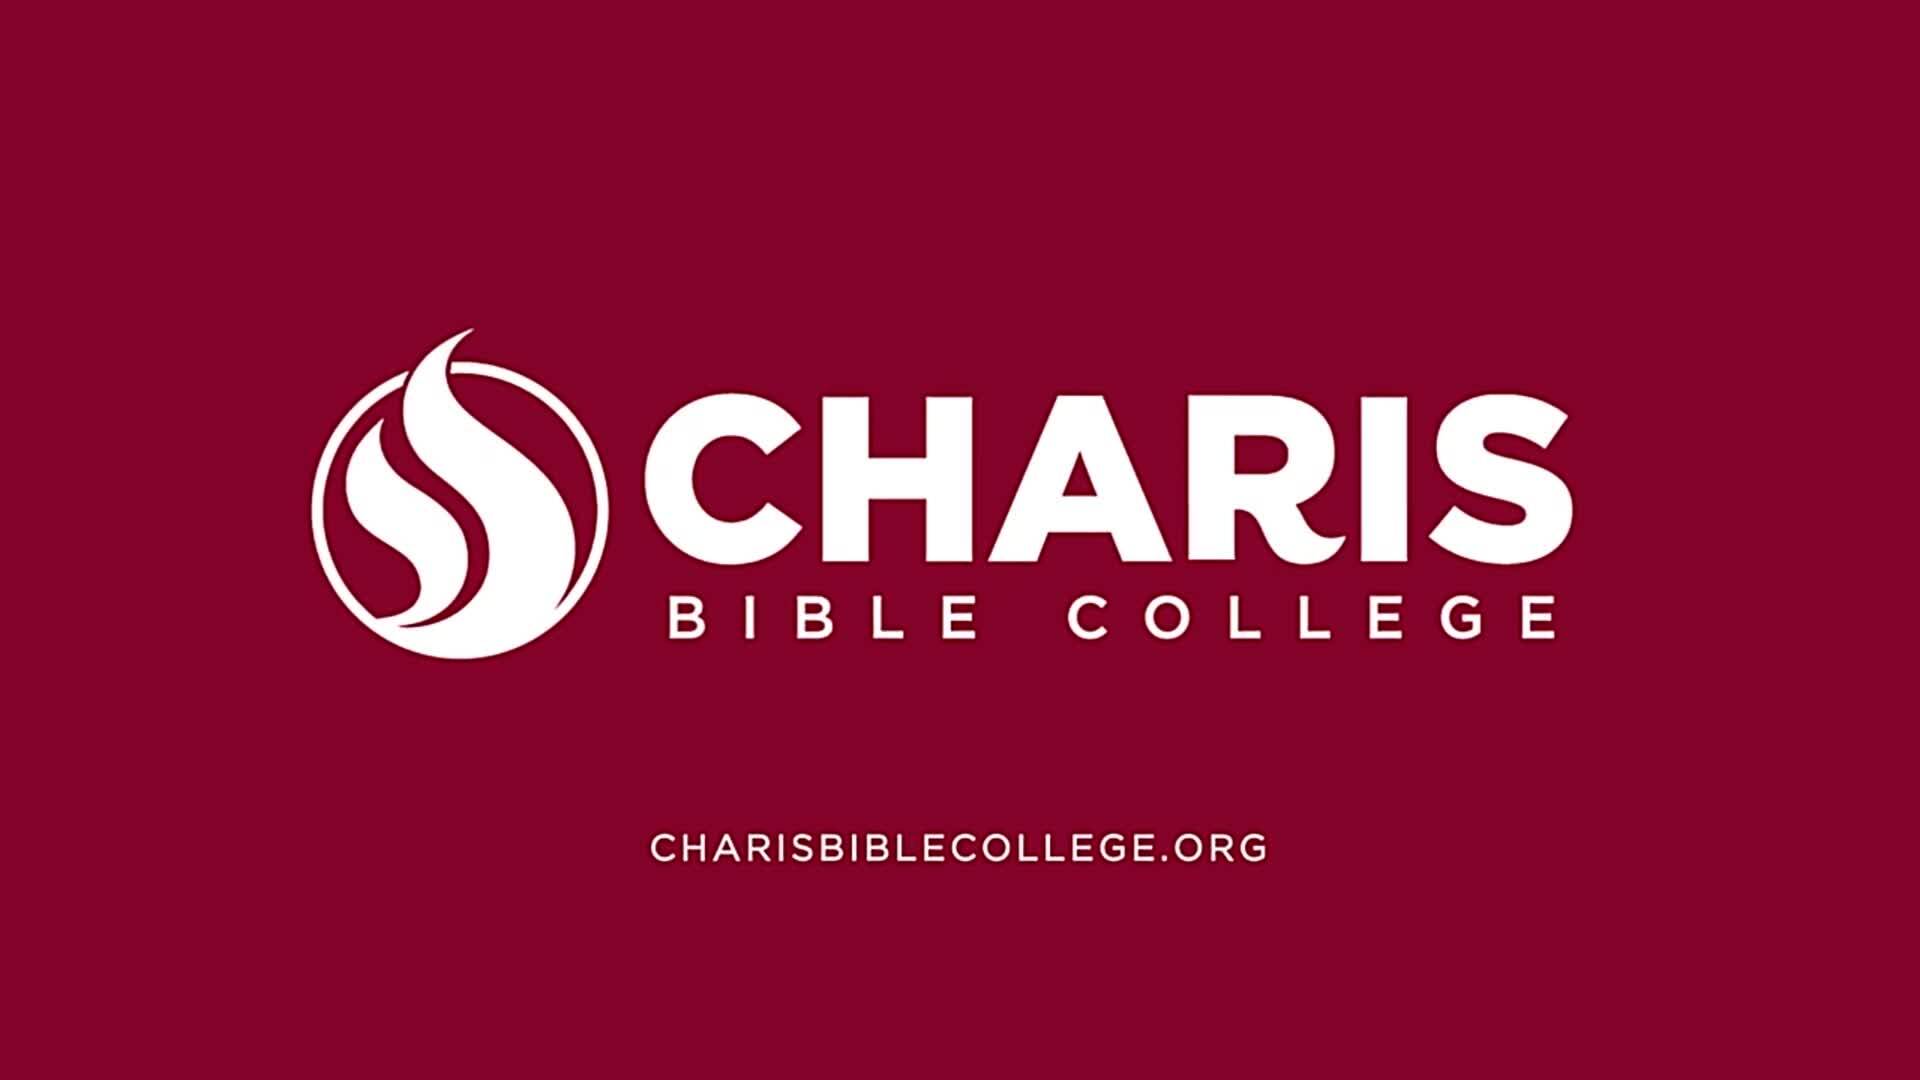 Charis Bible College - Andrew Wommack Ministries